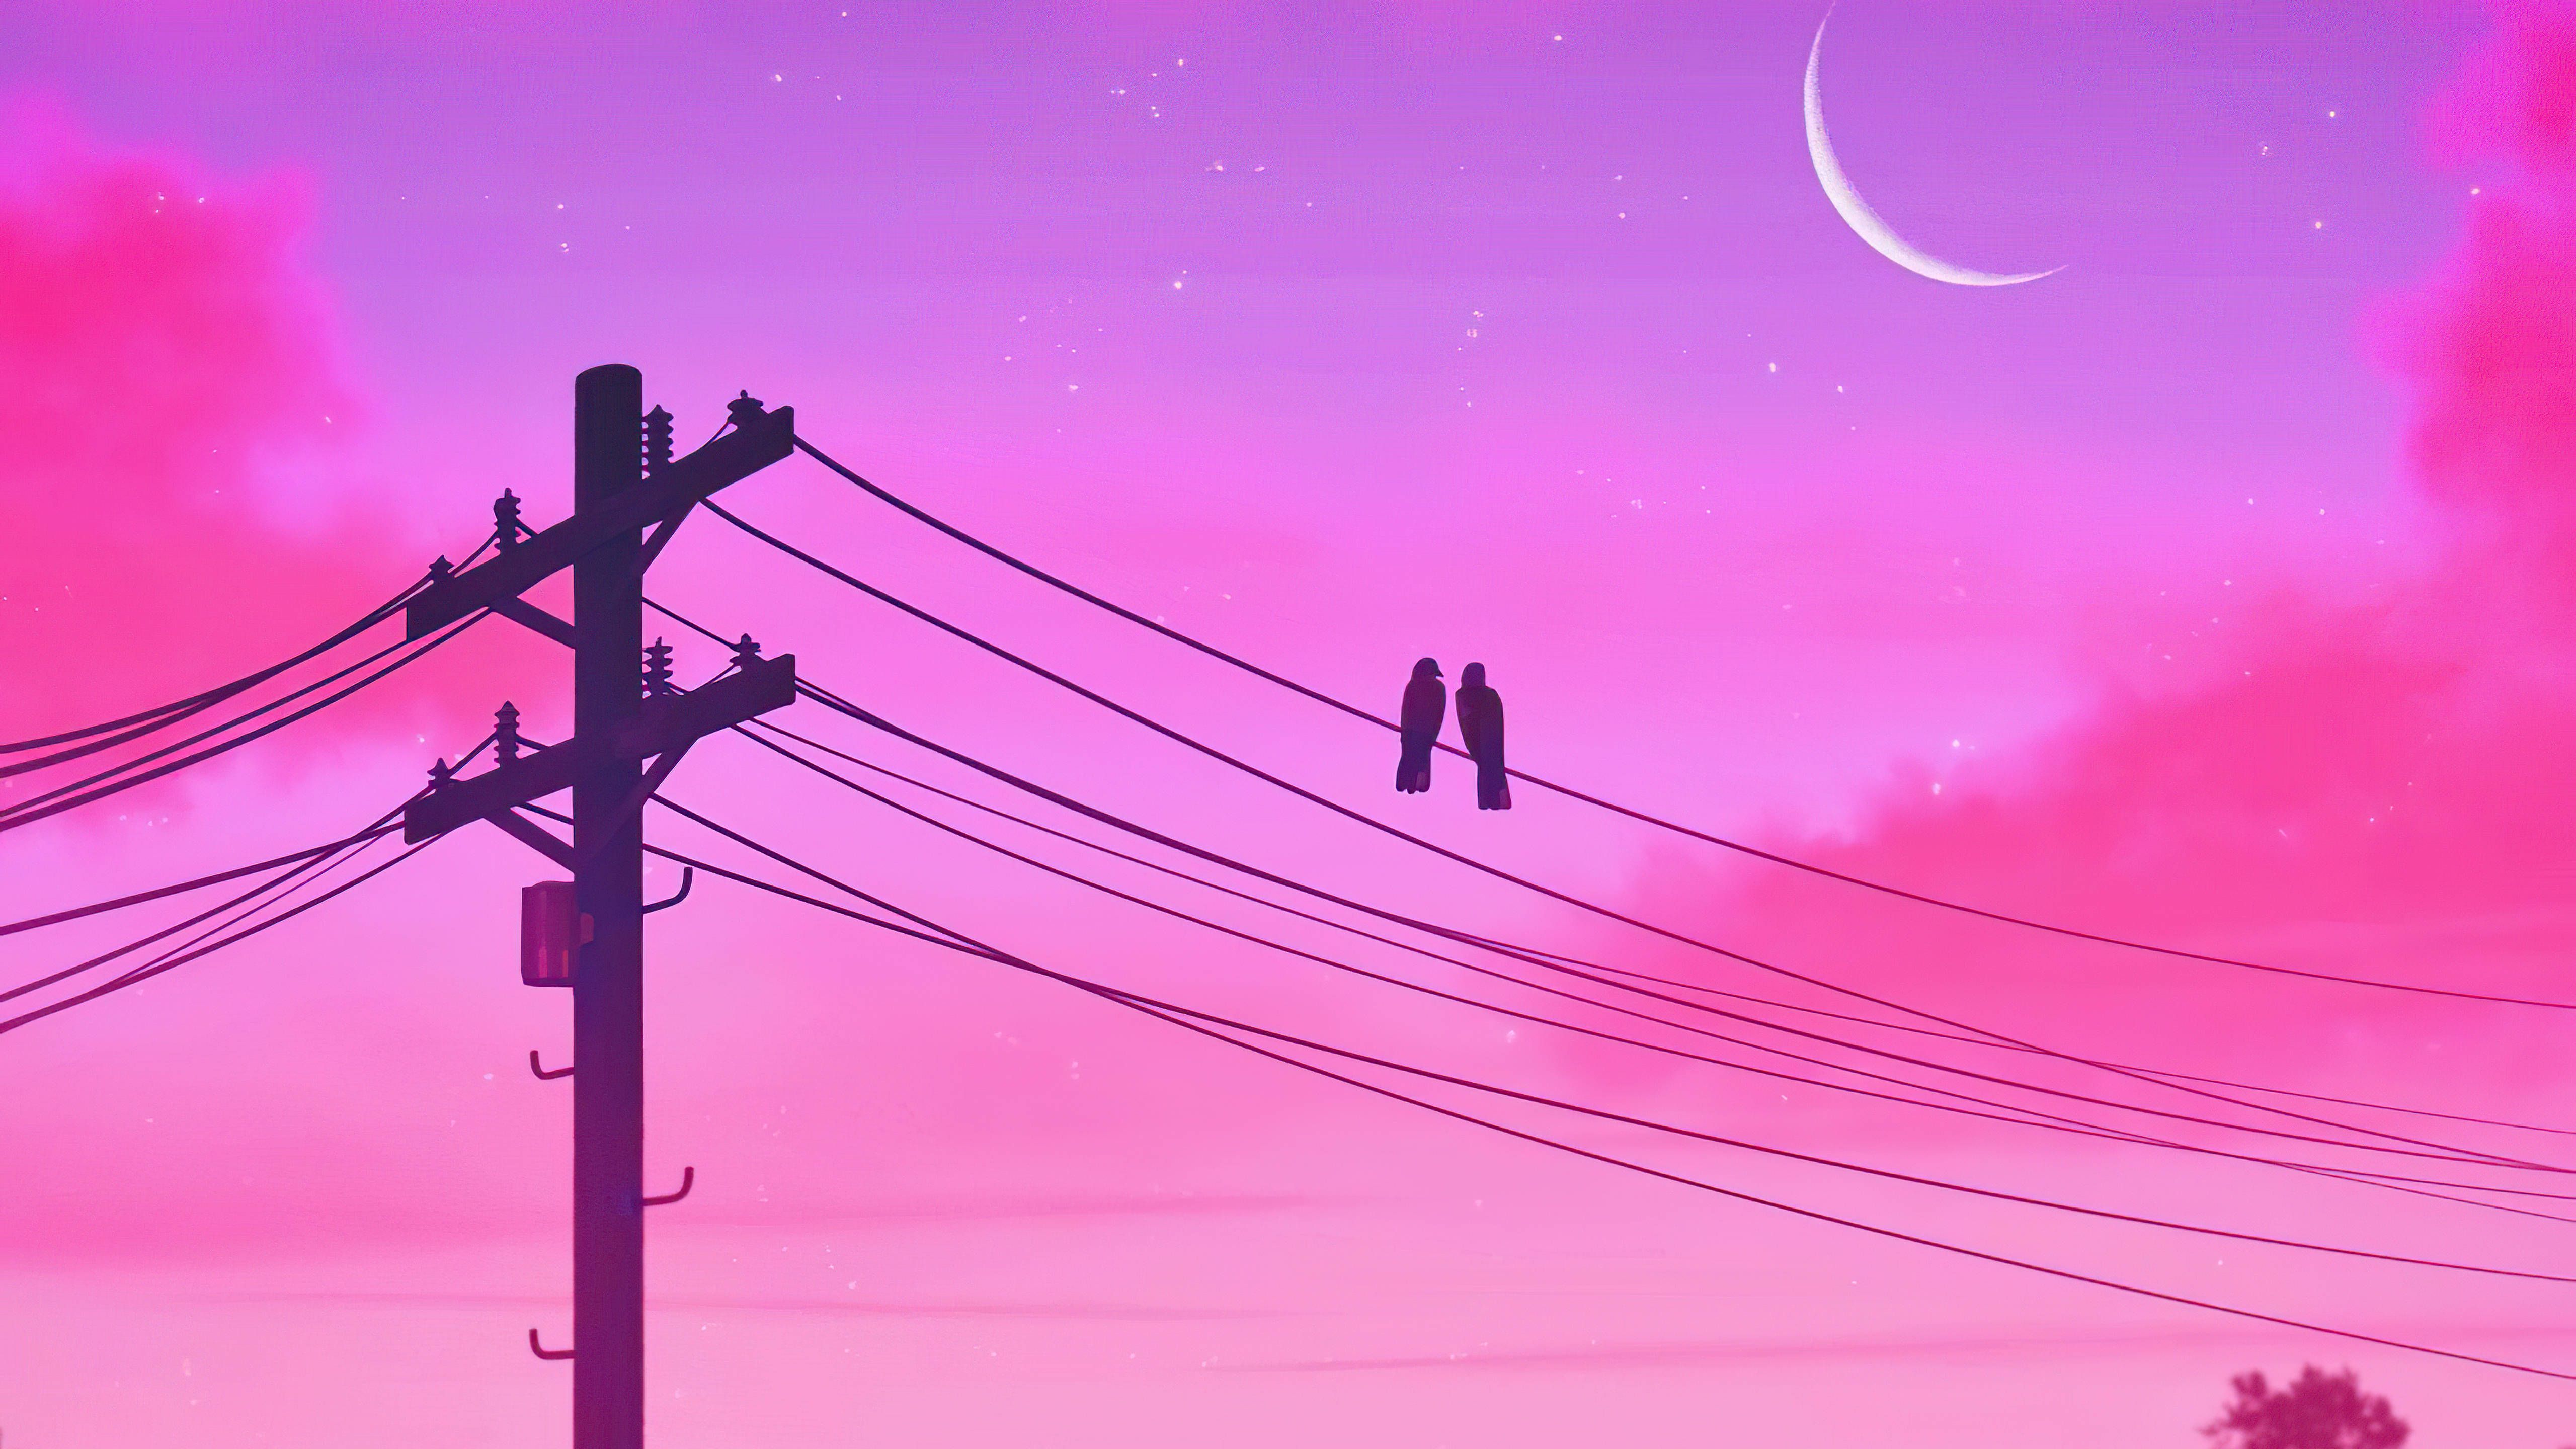 A couple on the power lines at sunset - 